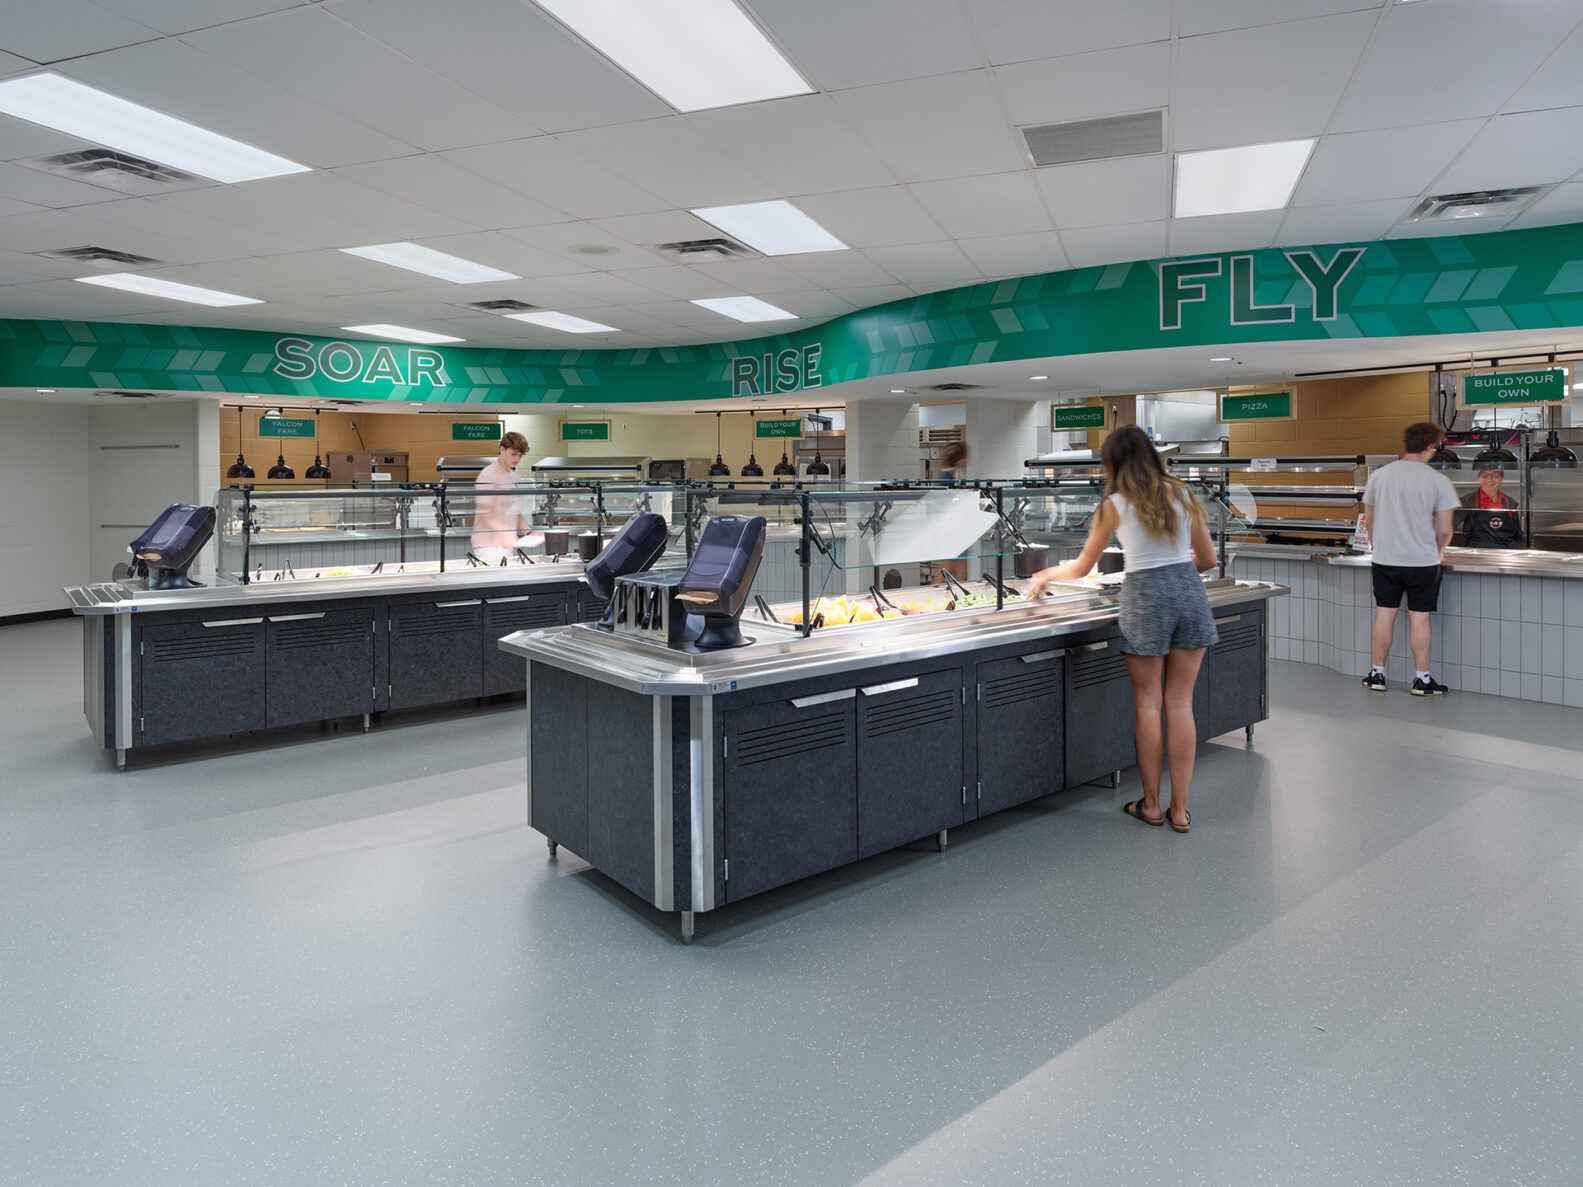 Students using the cafeteria at Staley High School, a McCownGordon Construction project.